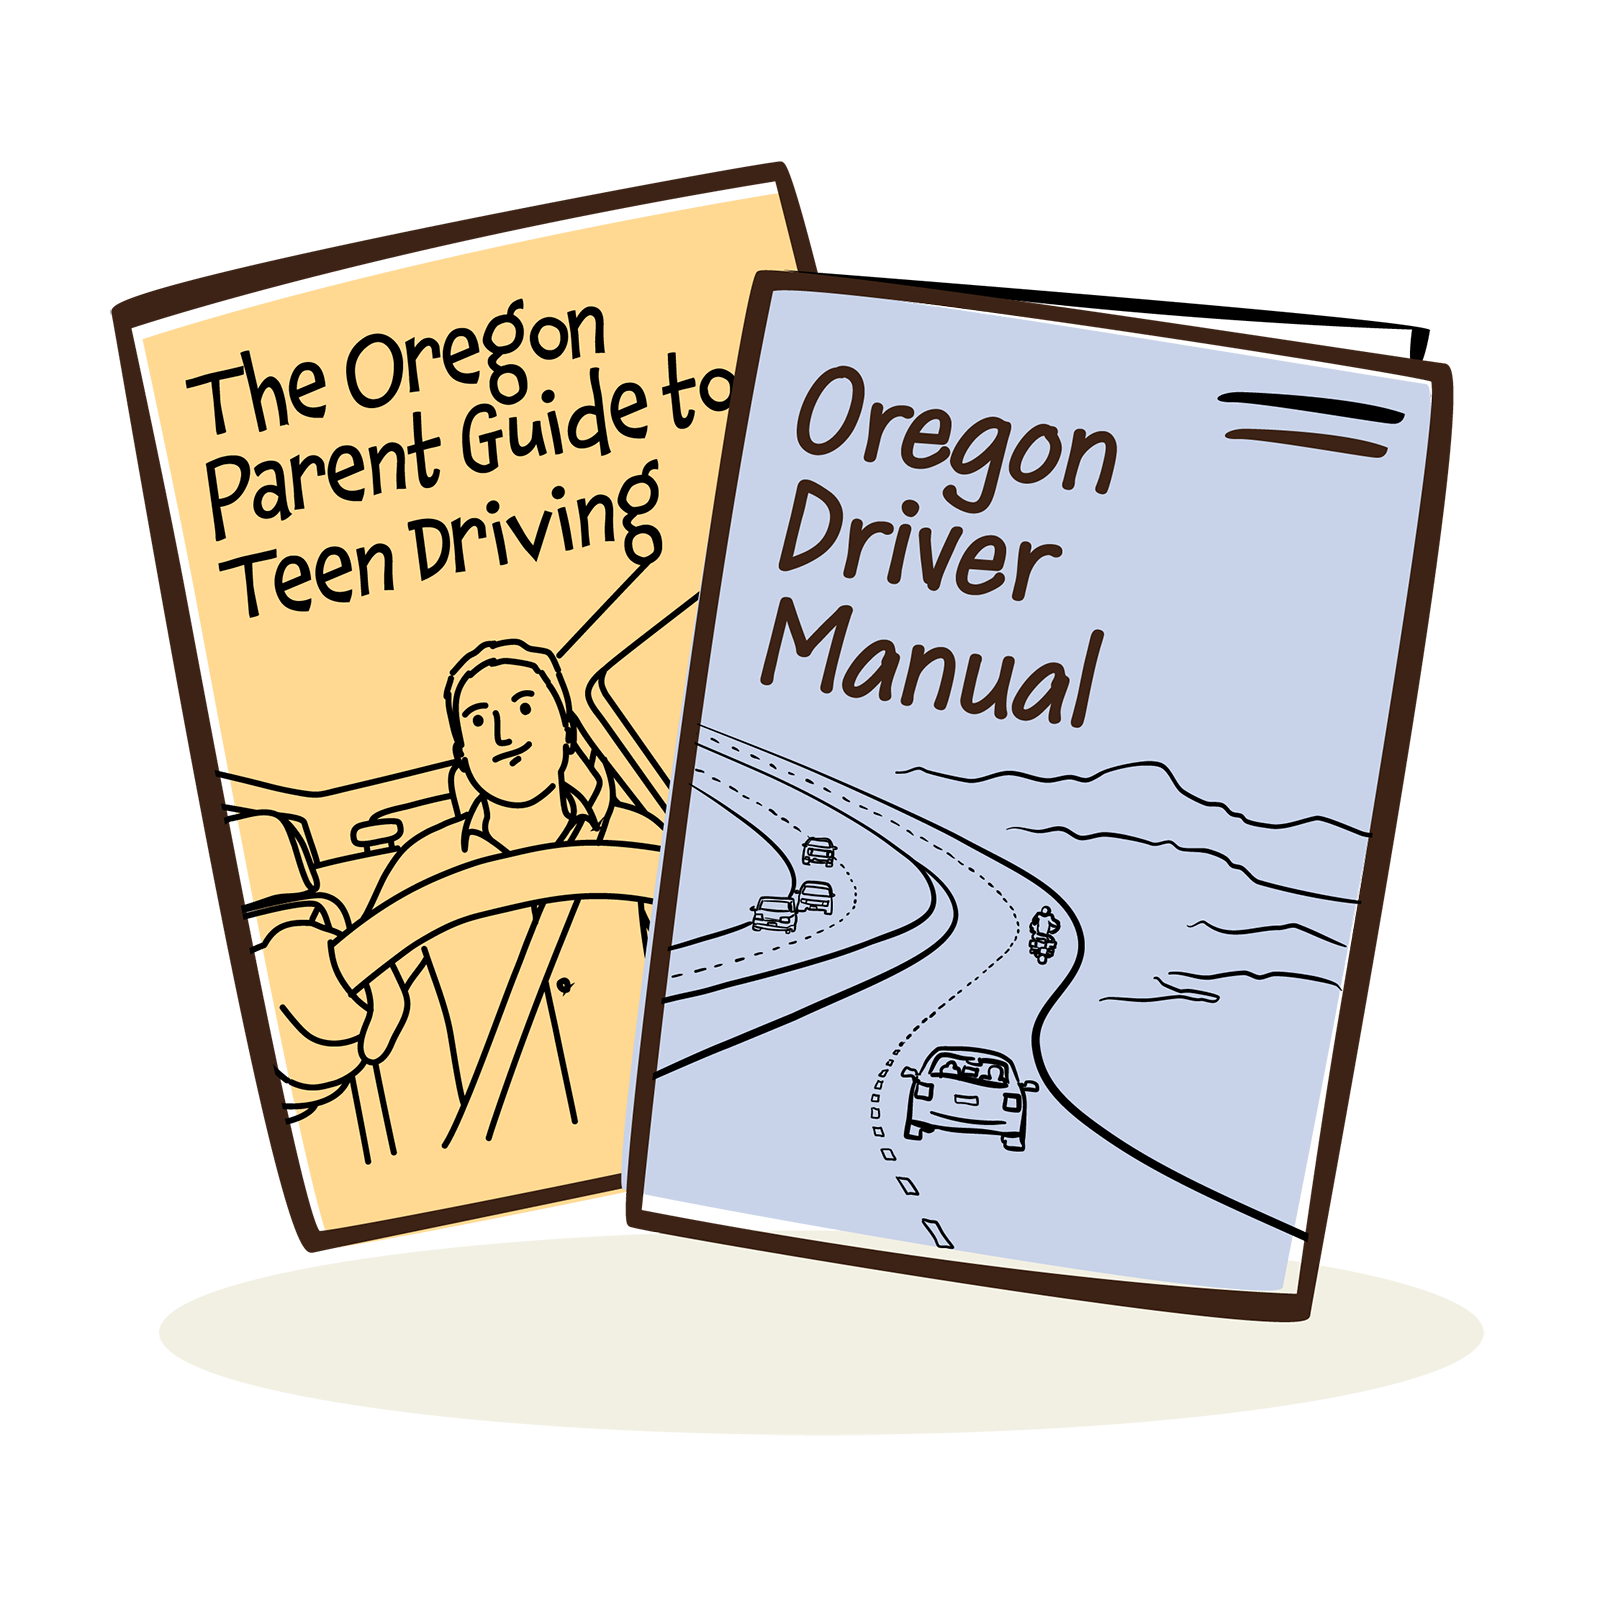 Two manuals side by side, yellow Parent Guide for Teen Driving on the left, Oregon Driver Manual on the right showing a road and motorcyclist